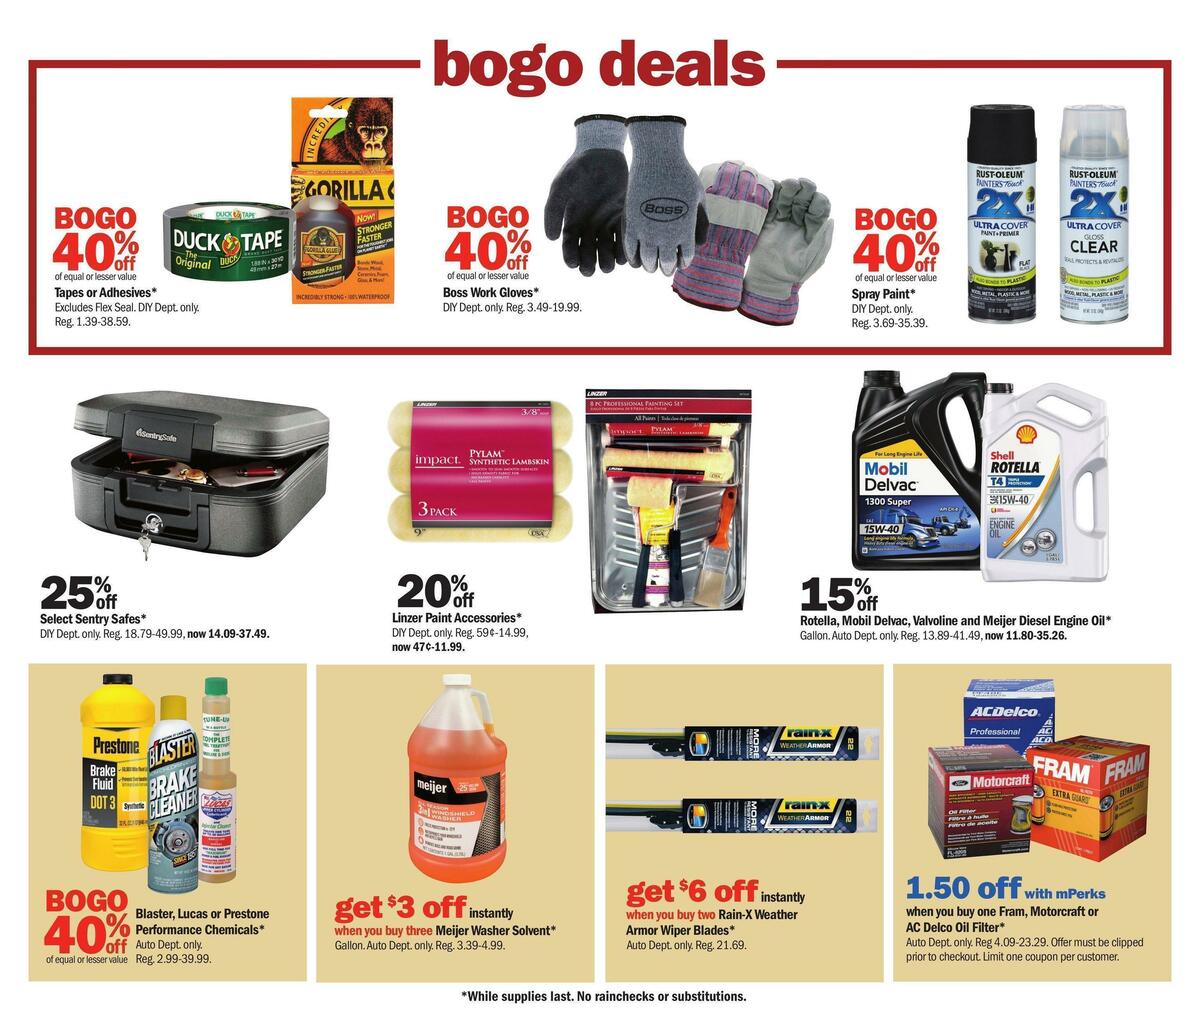 Meijer Auto Weekly Ad from September 18